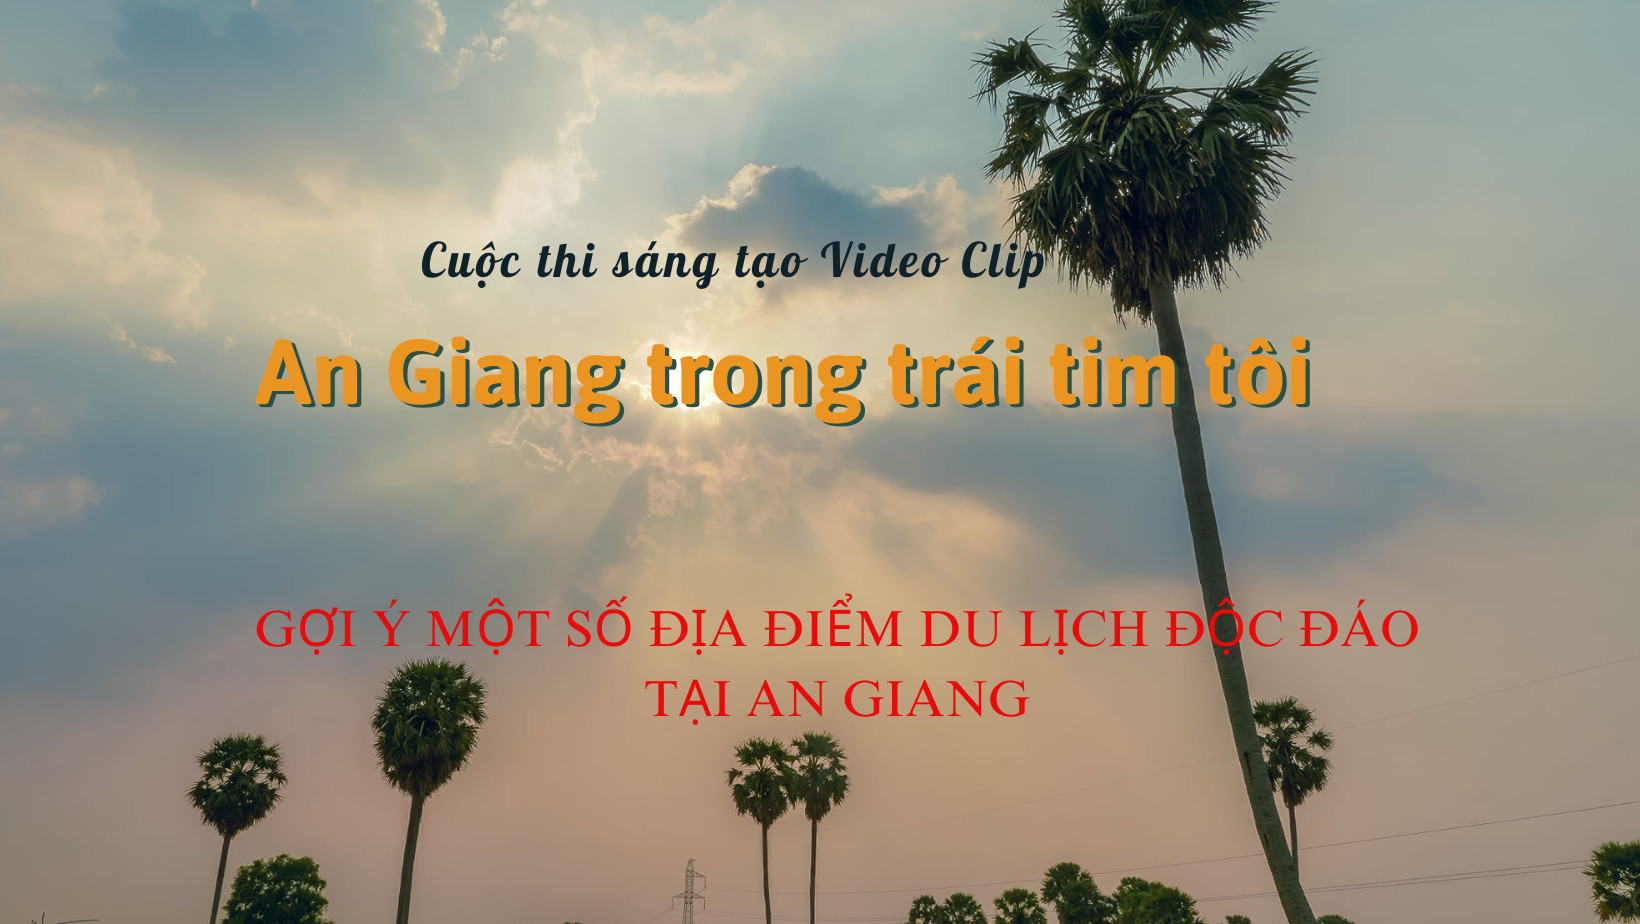 SUGGESTIONS OF SOME UNIQUE TOURISM DESTINATIONS IN AN GIANG